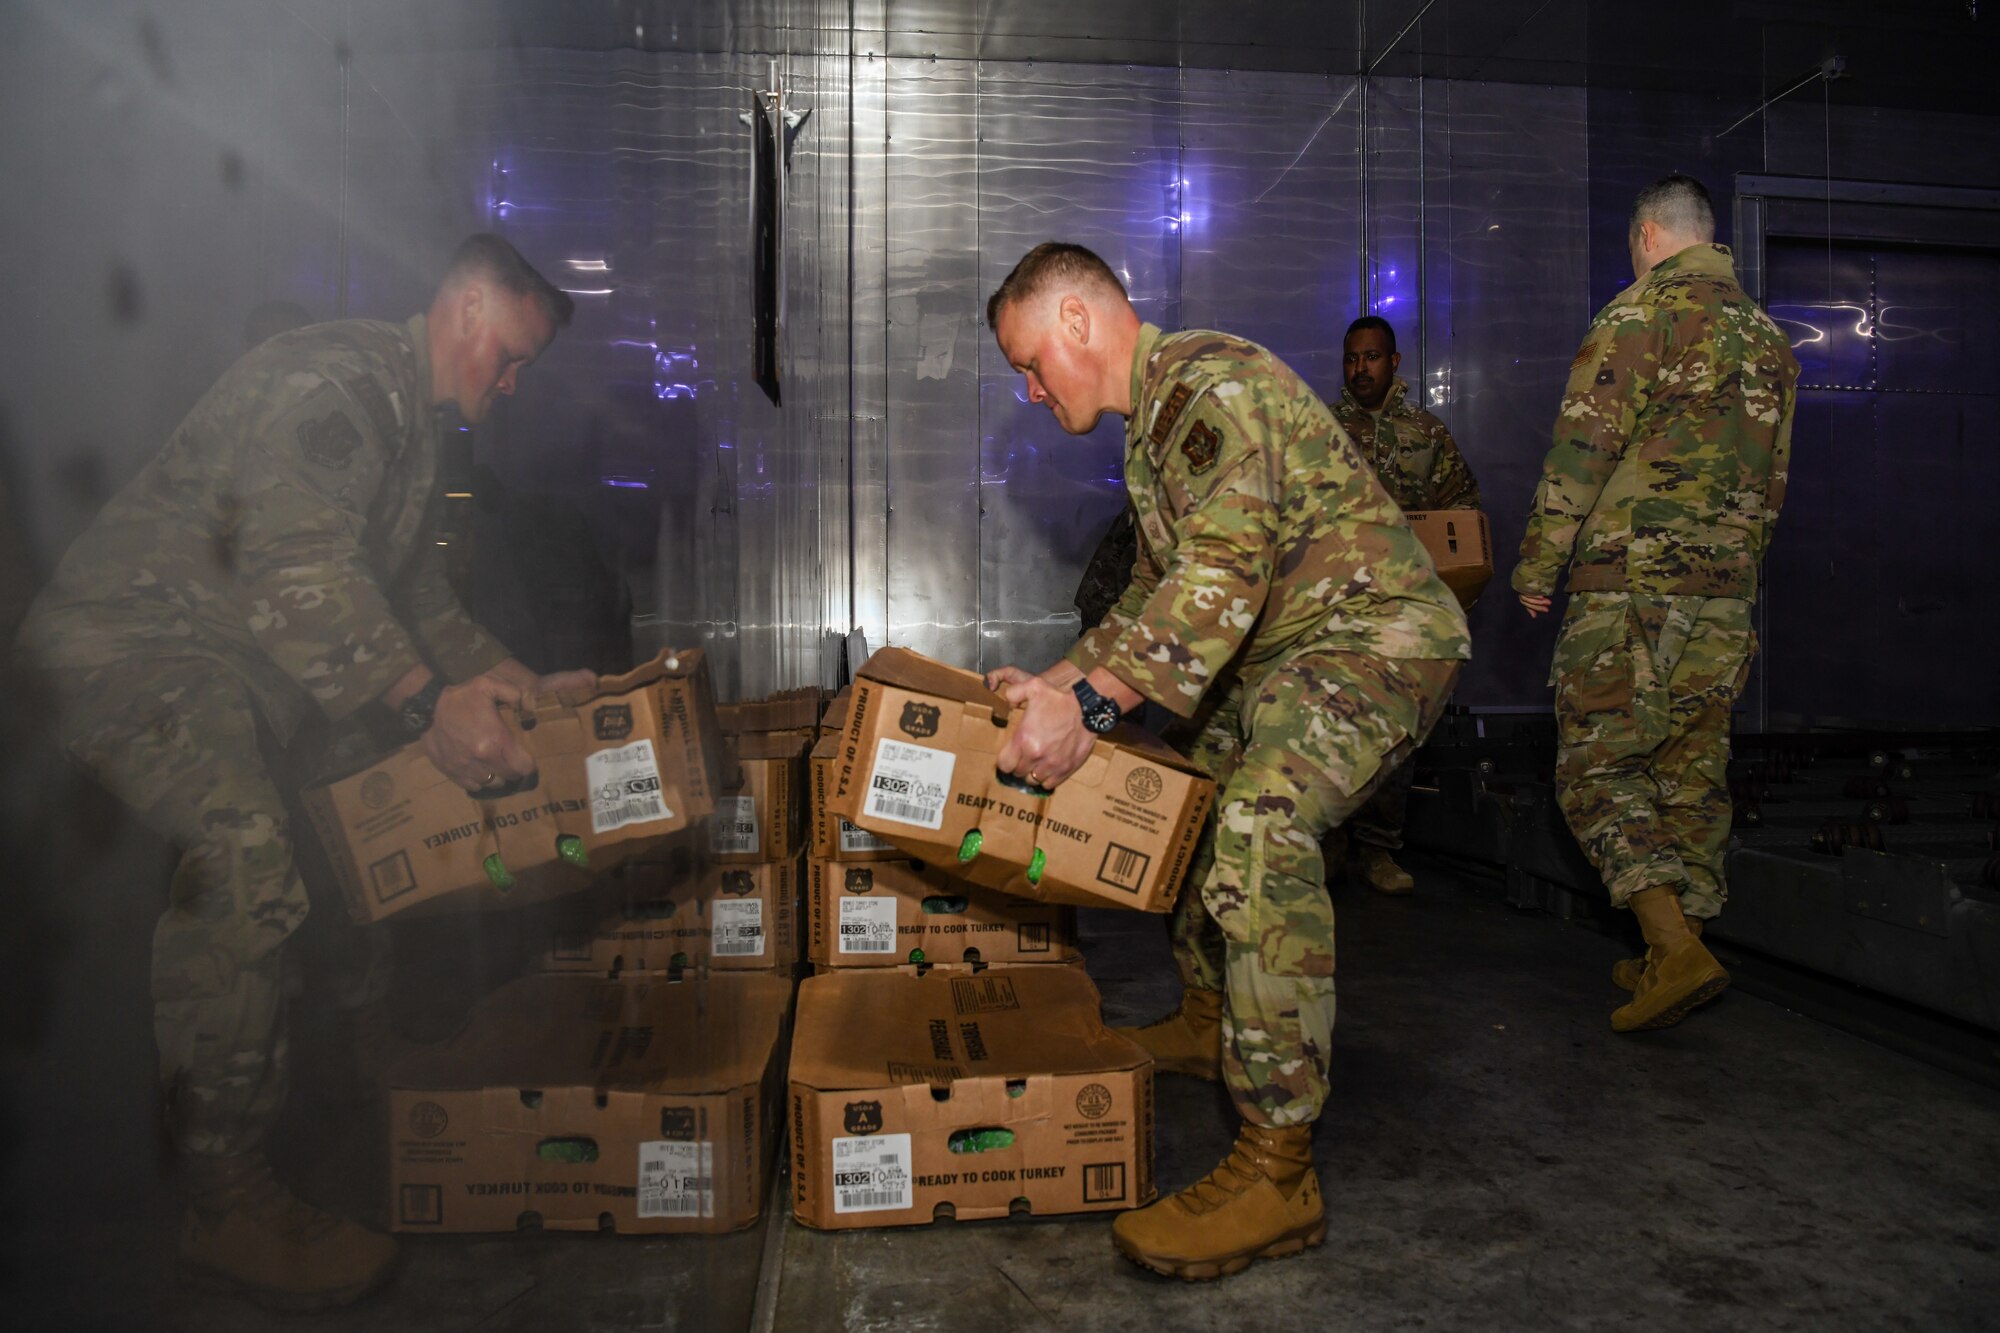 Airmen move boxes of frozen turkeys inside a cooler during a community relations event.